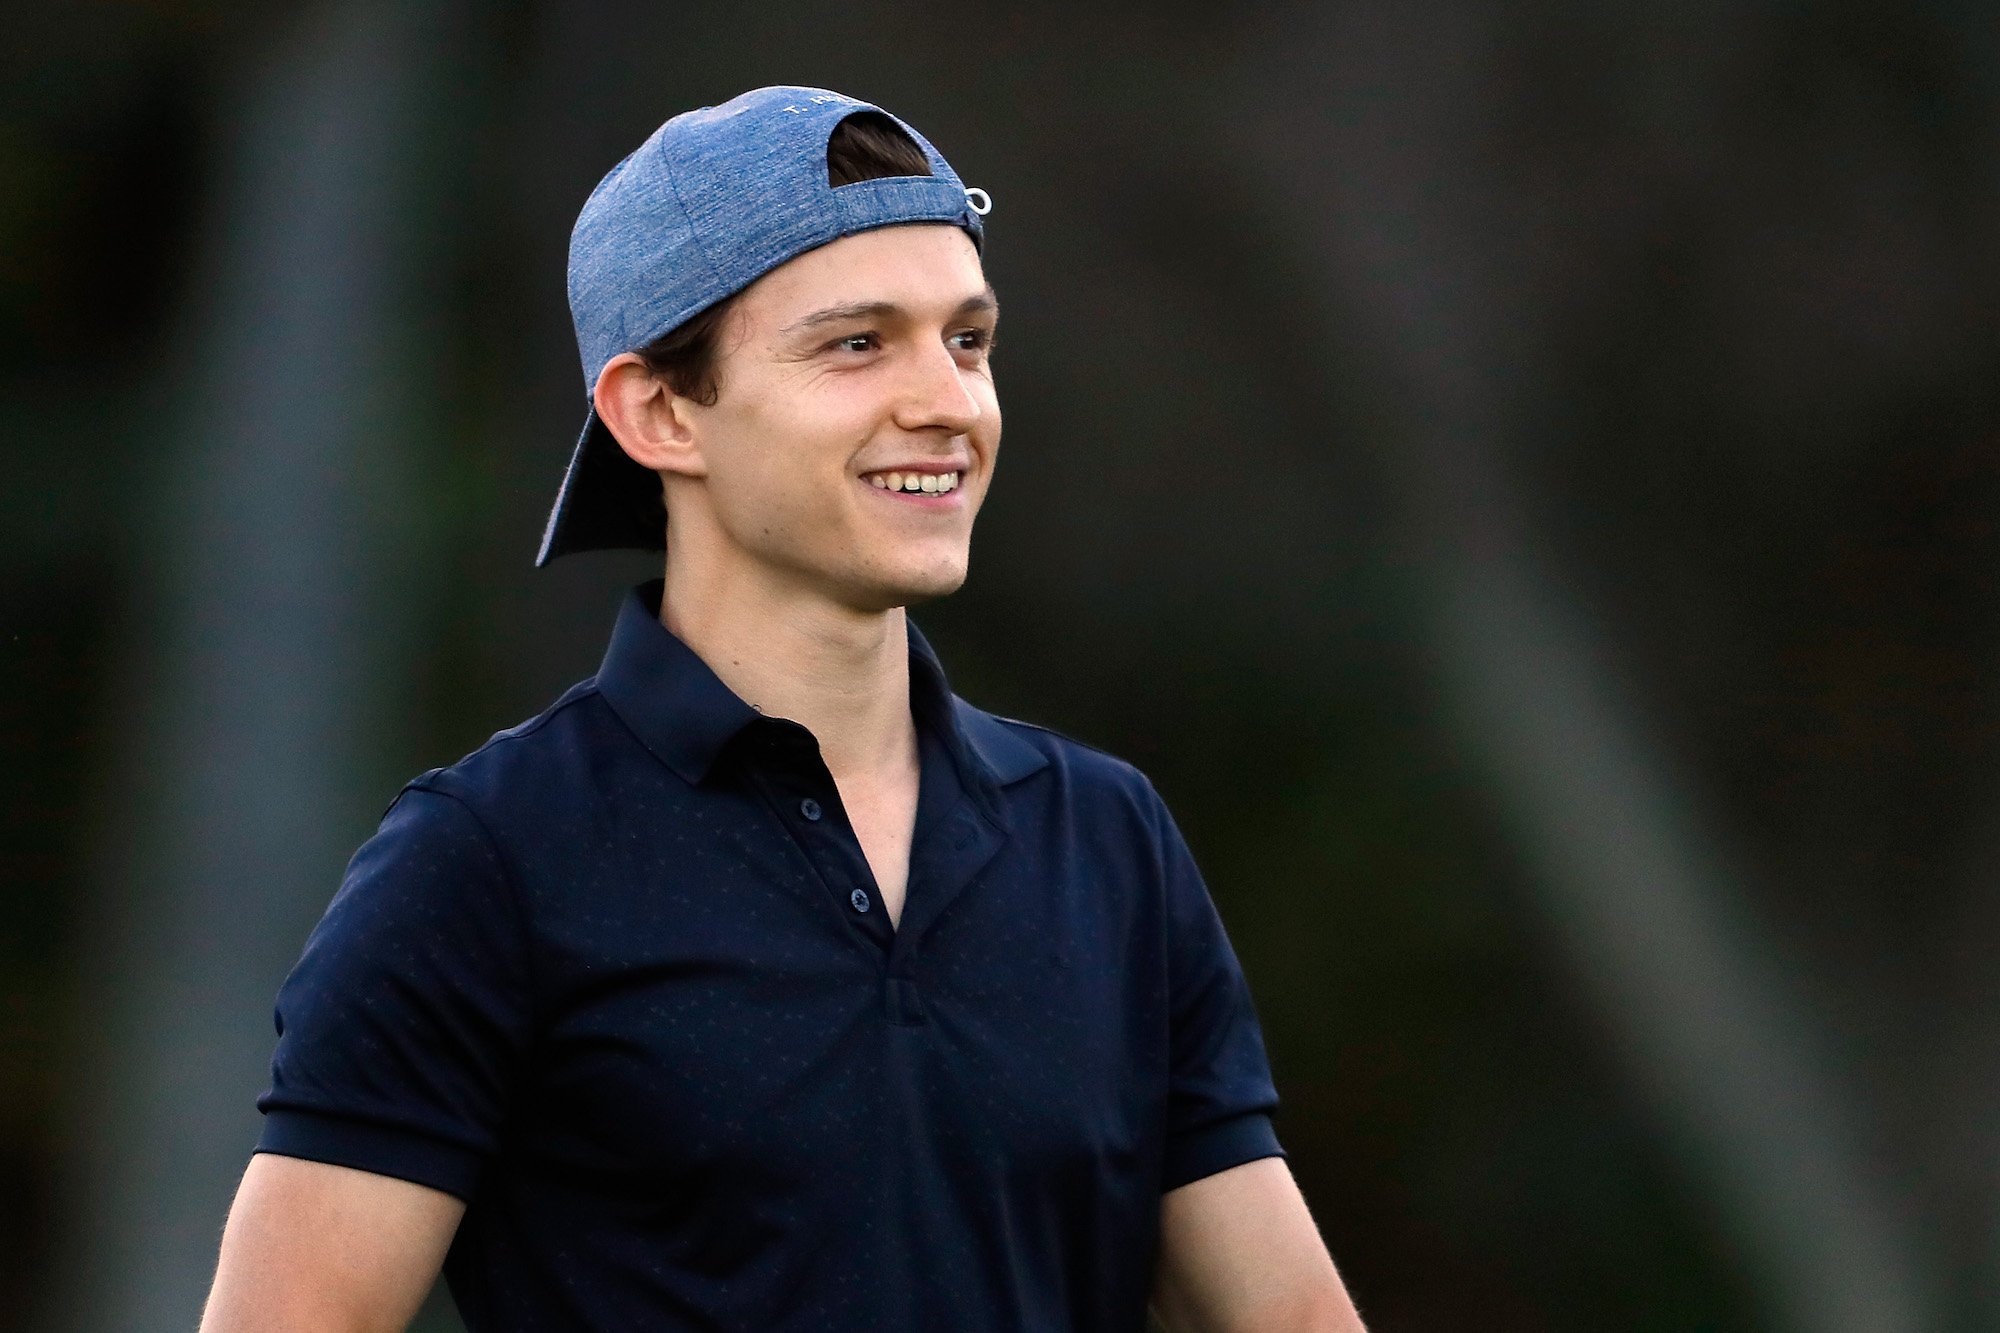 Tom Holland during a practice round at the Sony Open In Hawaii at Waialae Country Club on Jan. 9, 2019